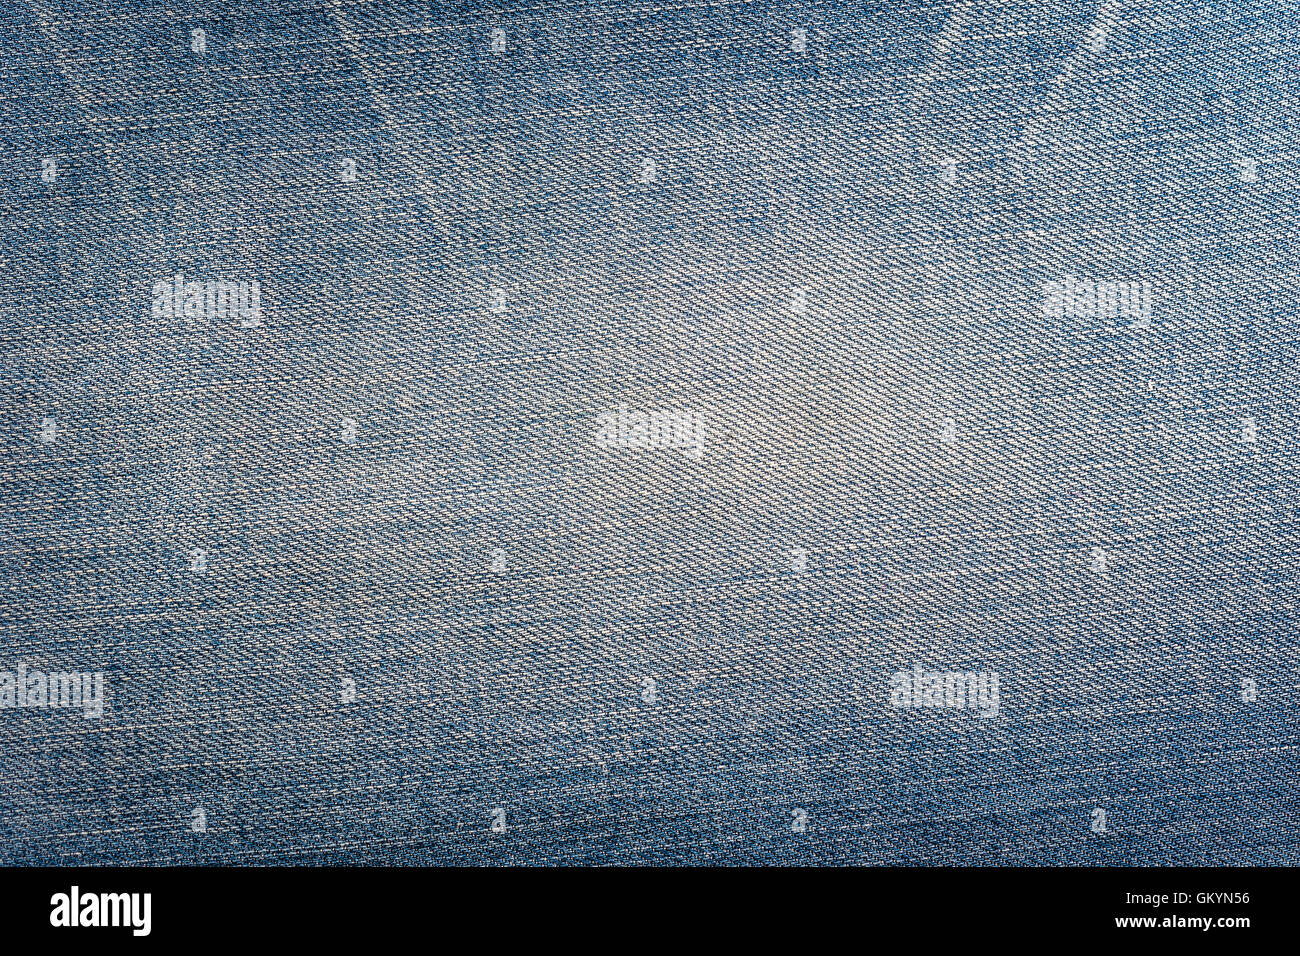 detail and texture of blue jeans background or backdrop Stock Photo